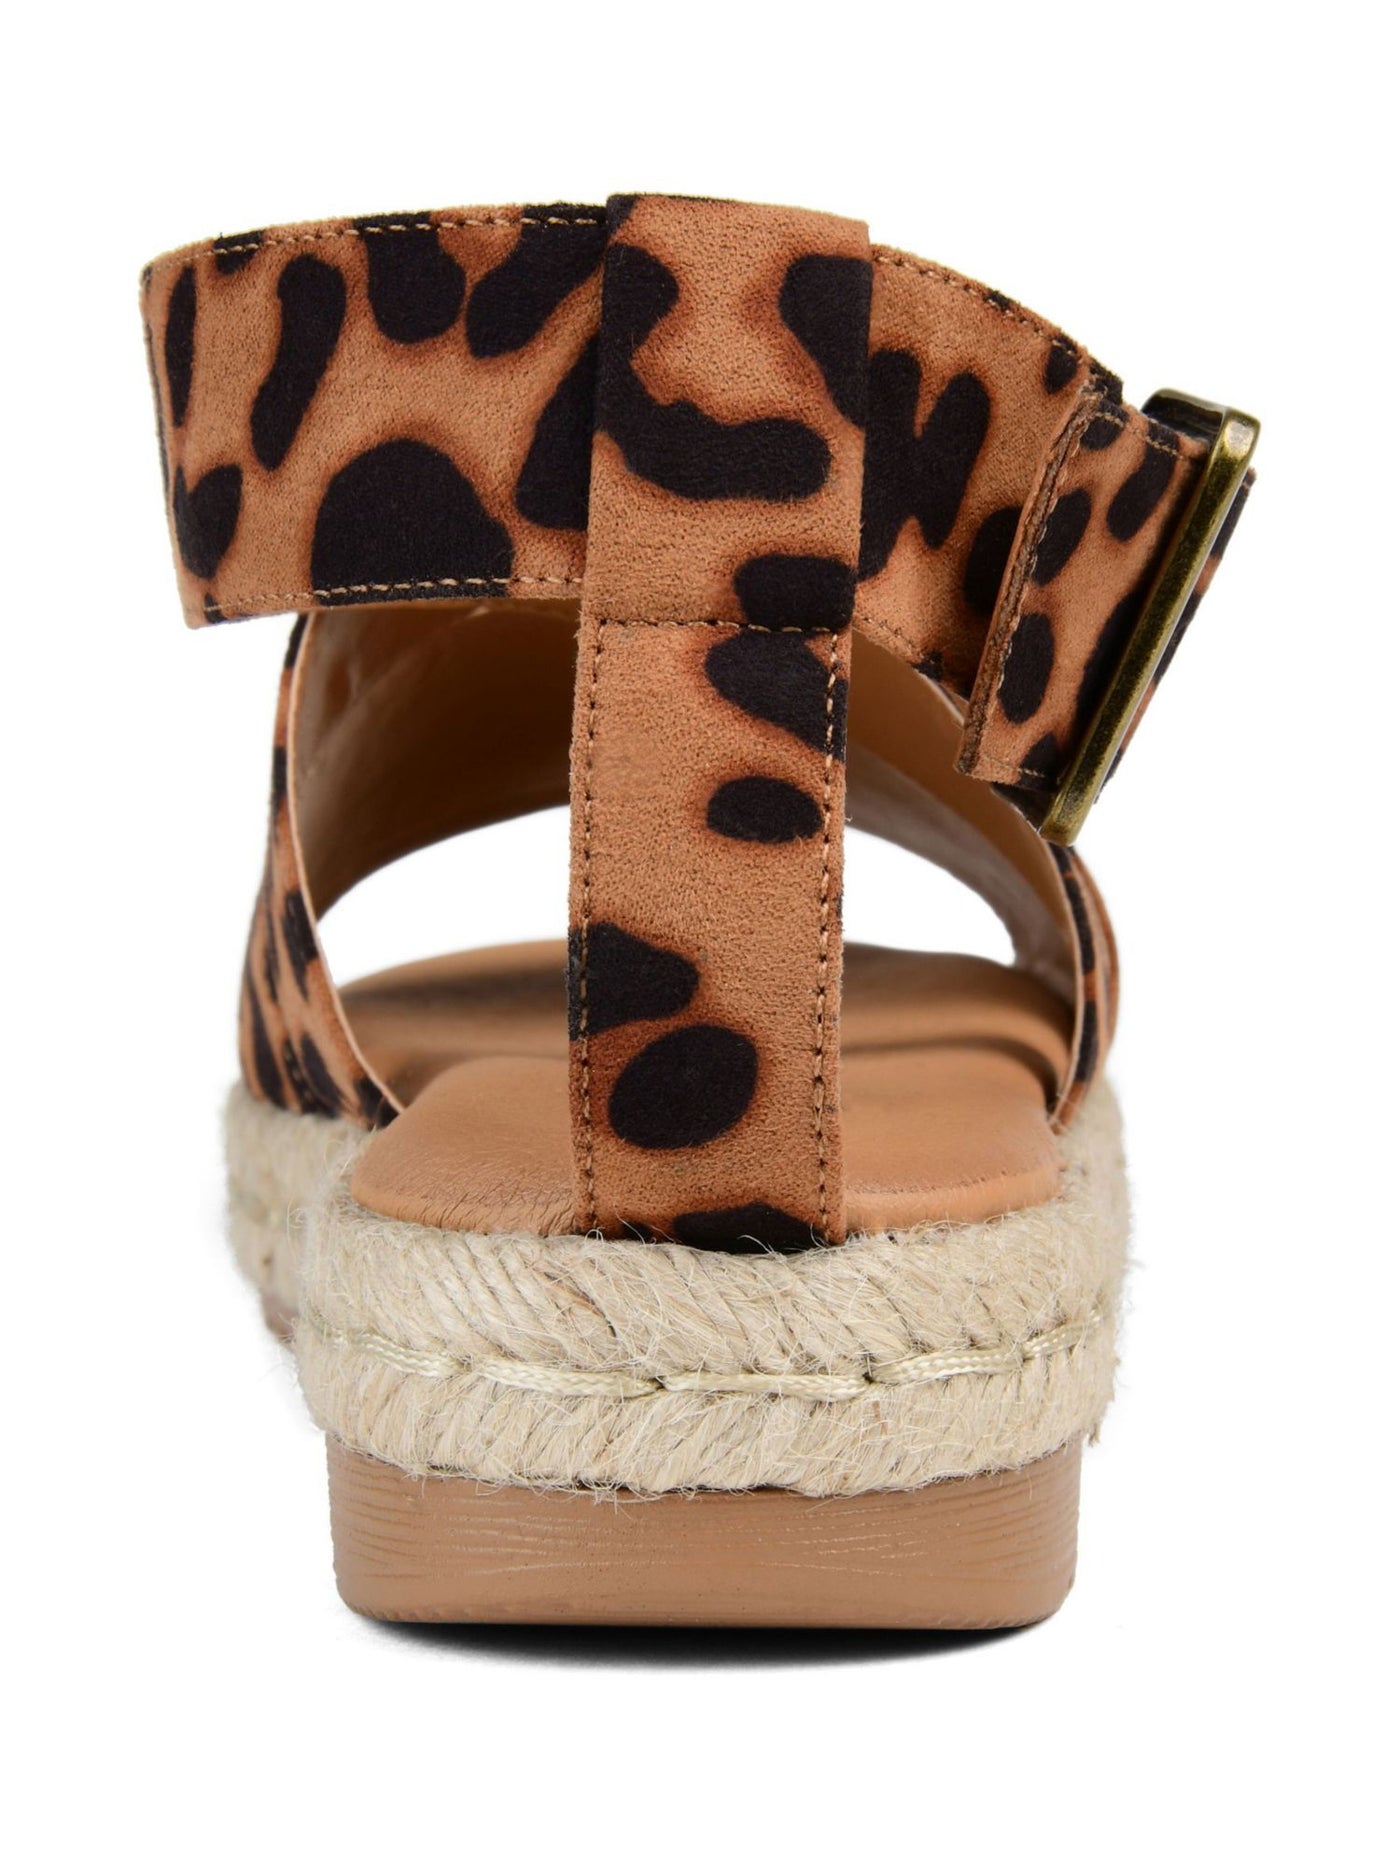 JOURNEE COLLECTION Womens Brown Animal Print Strappy Padded Trinity Round Toe Platform Buckle Espadrille Shoes 7.5 M